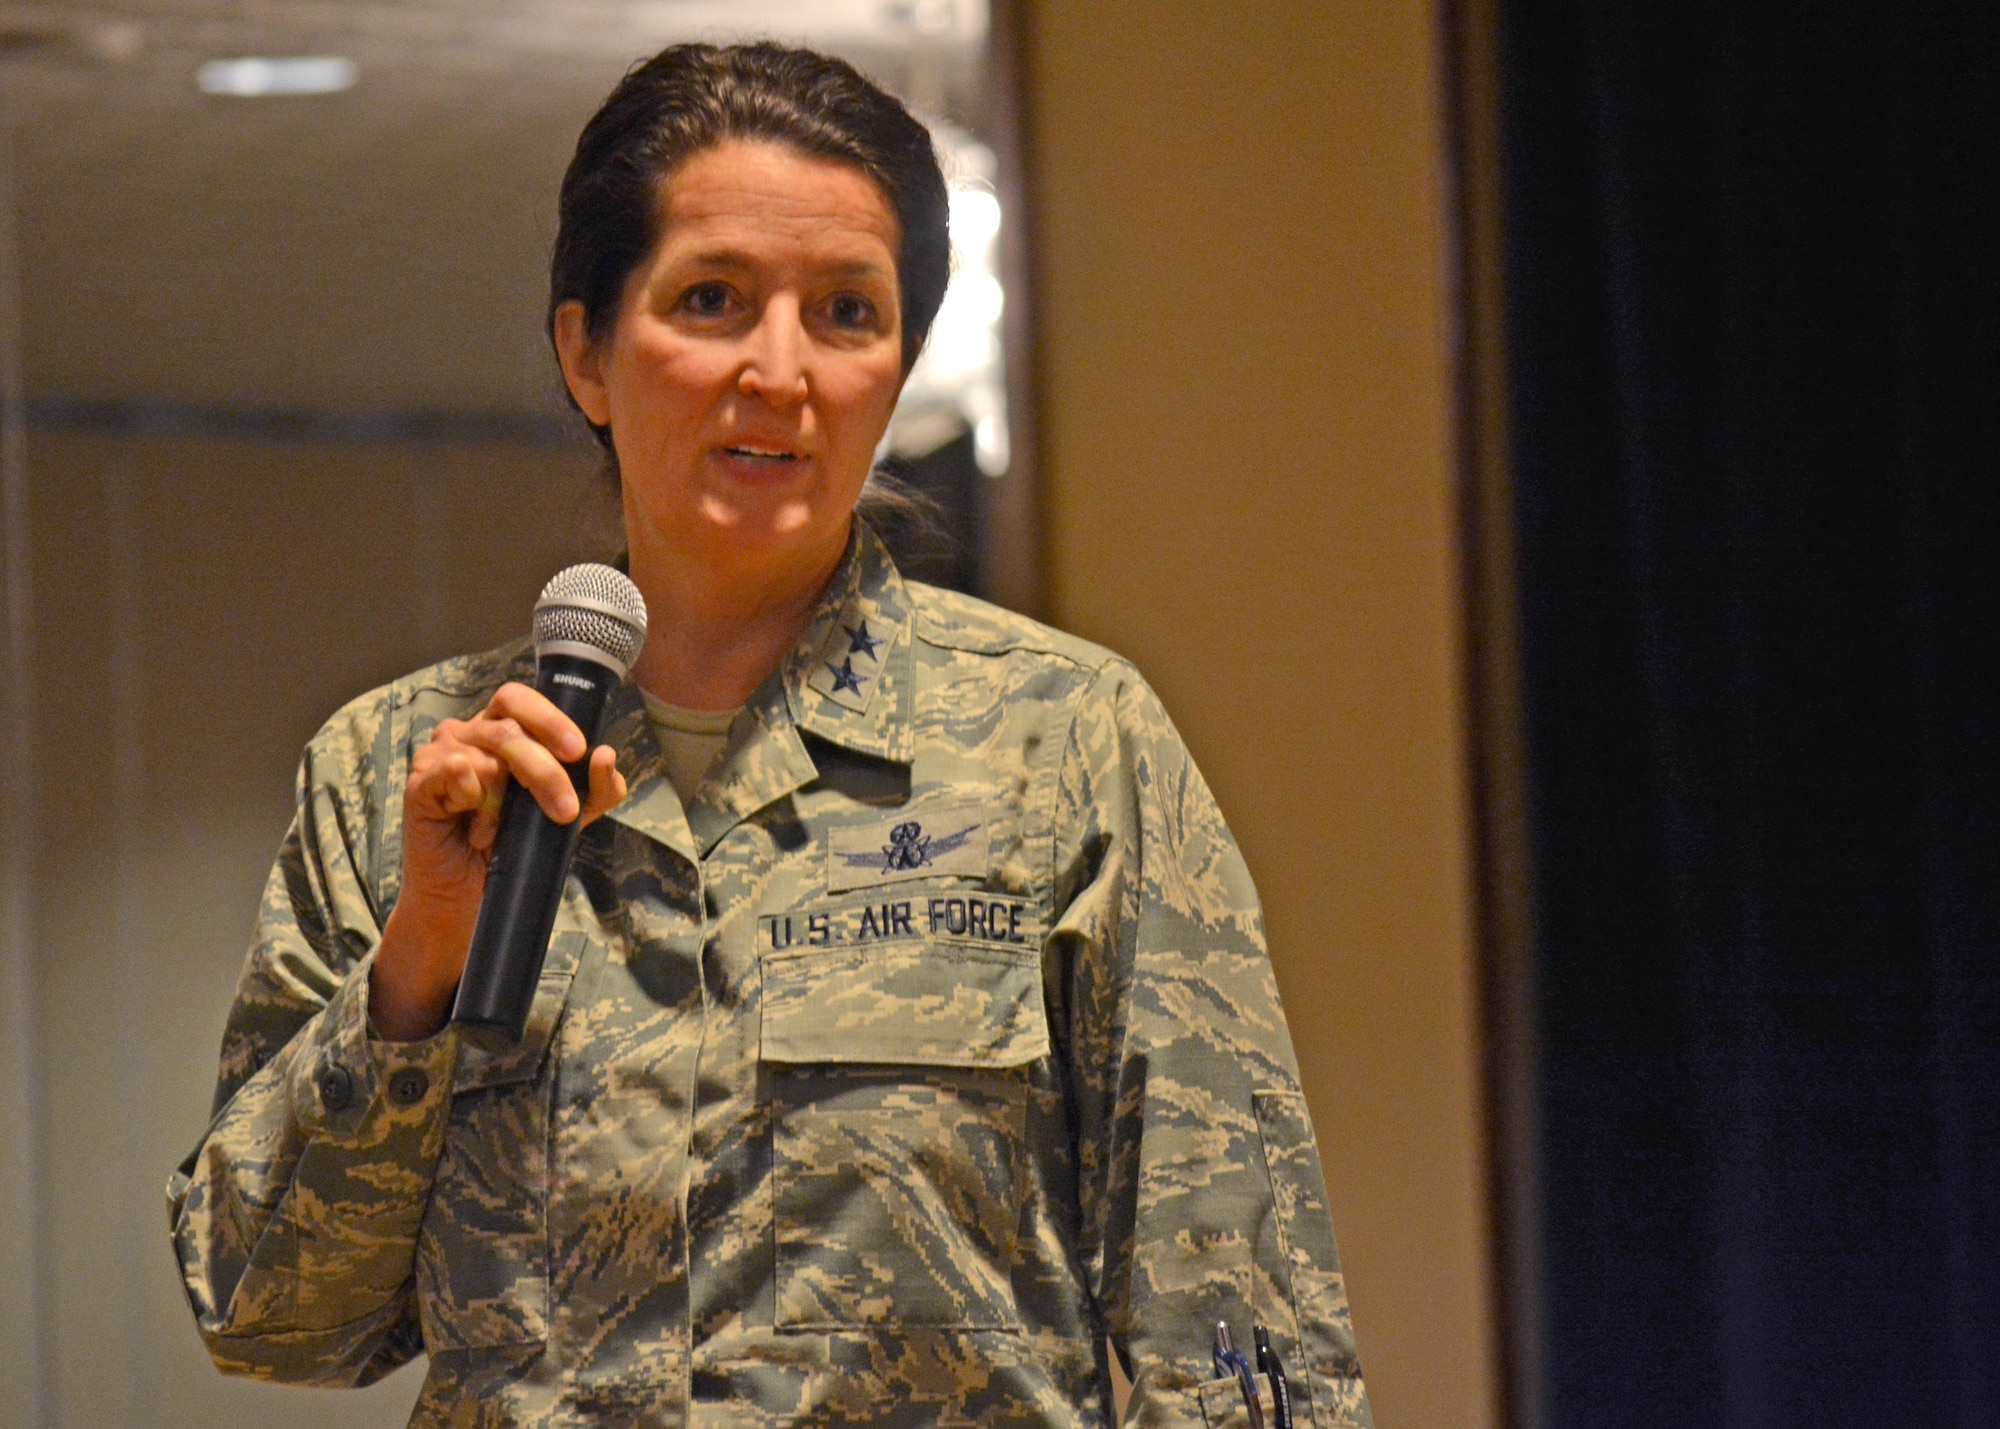 PETERSON AIR FORCE BASE, Colo. -- Maj. Gen. Nina Armango, Director of Strategic Plans, Programs, Requirements and Analysis, Headquarters Air Force Space Command, speaks to Airmen and civilians attending the Women's Leadership Symposium at the Peterson Club on Wednesday, Mar. 8th, 2017. Attendees came from a variety of bases, including Buckley, Peterson, Schriever, Vandenberg and Cheyenne Mountain. (U.S. Air Force photo/Senior Airman Laura Turner)